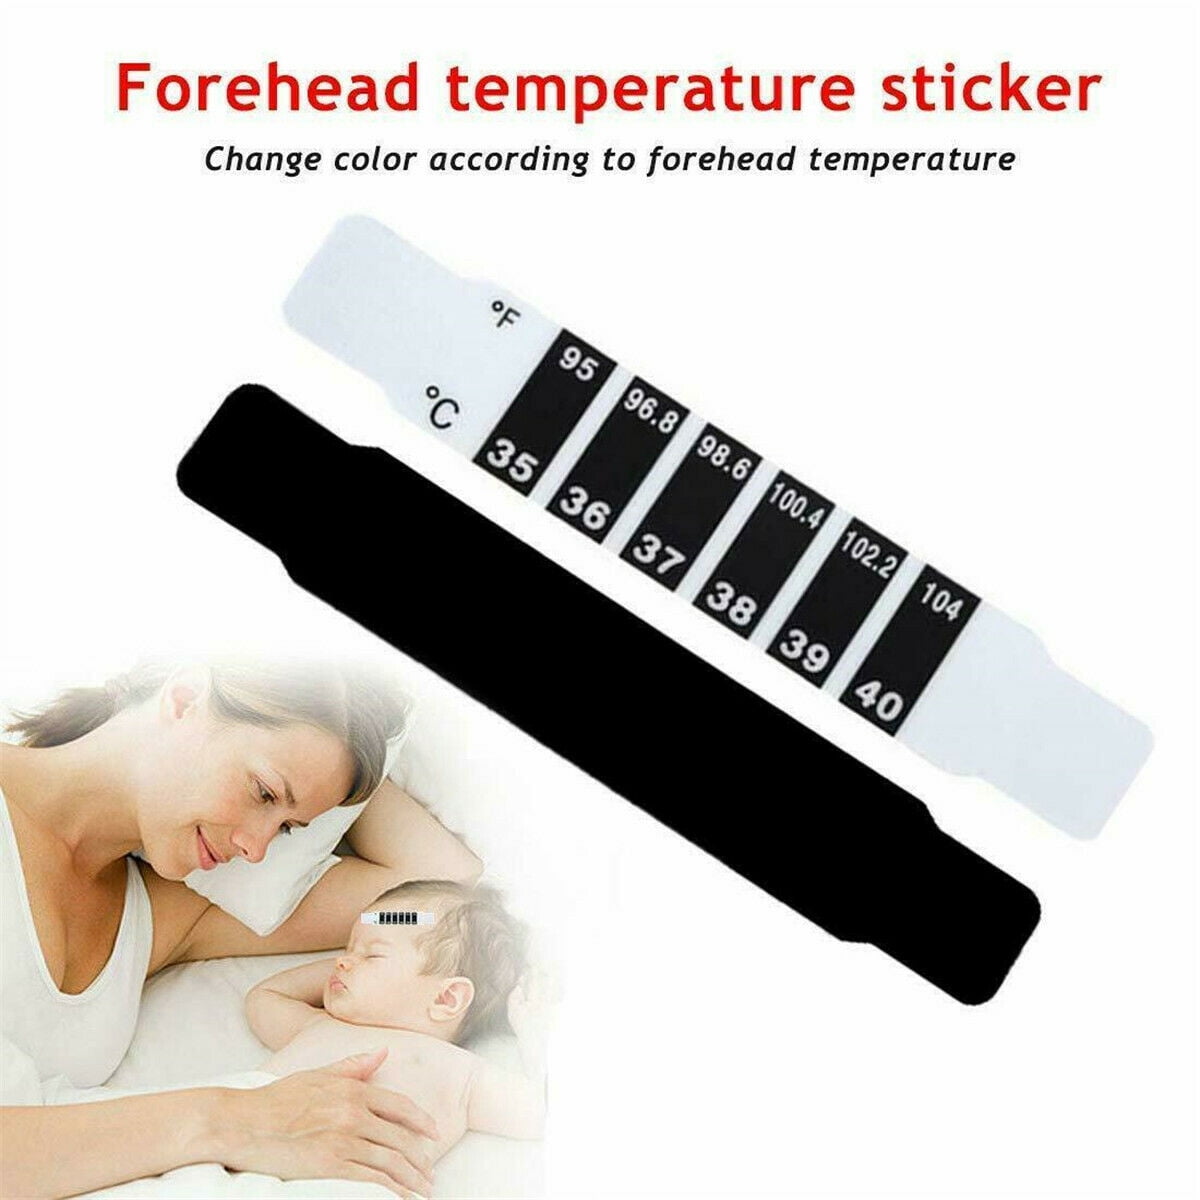 10Safe Infant Kid Baby Forehead Strip Head Temperature Test Thermometer Stick ZF 